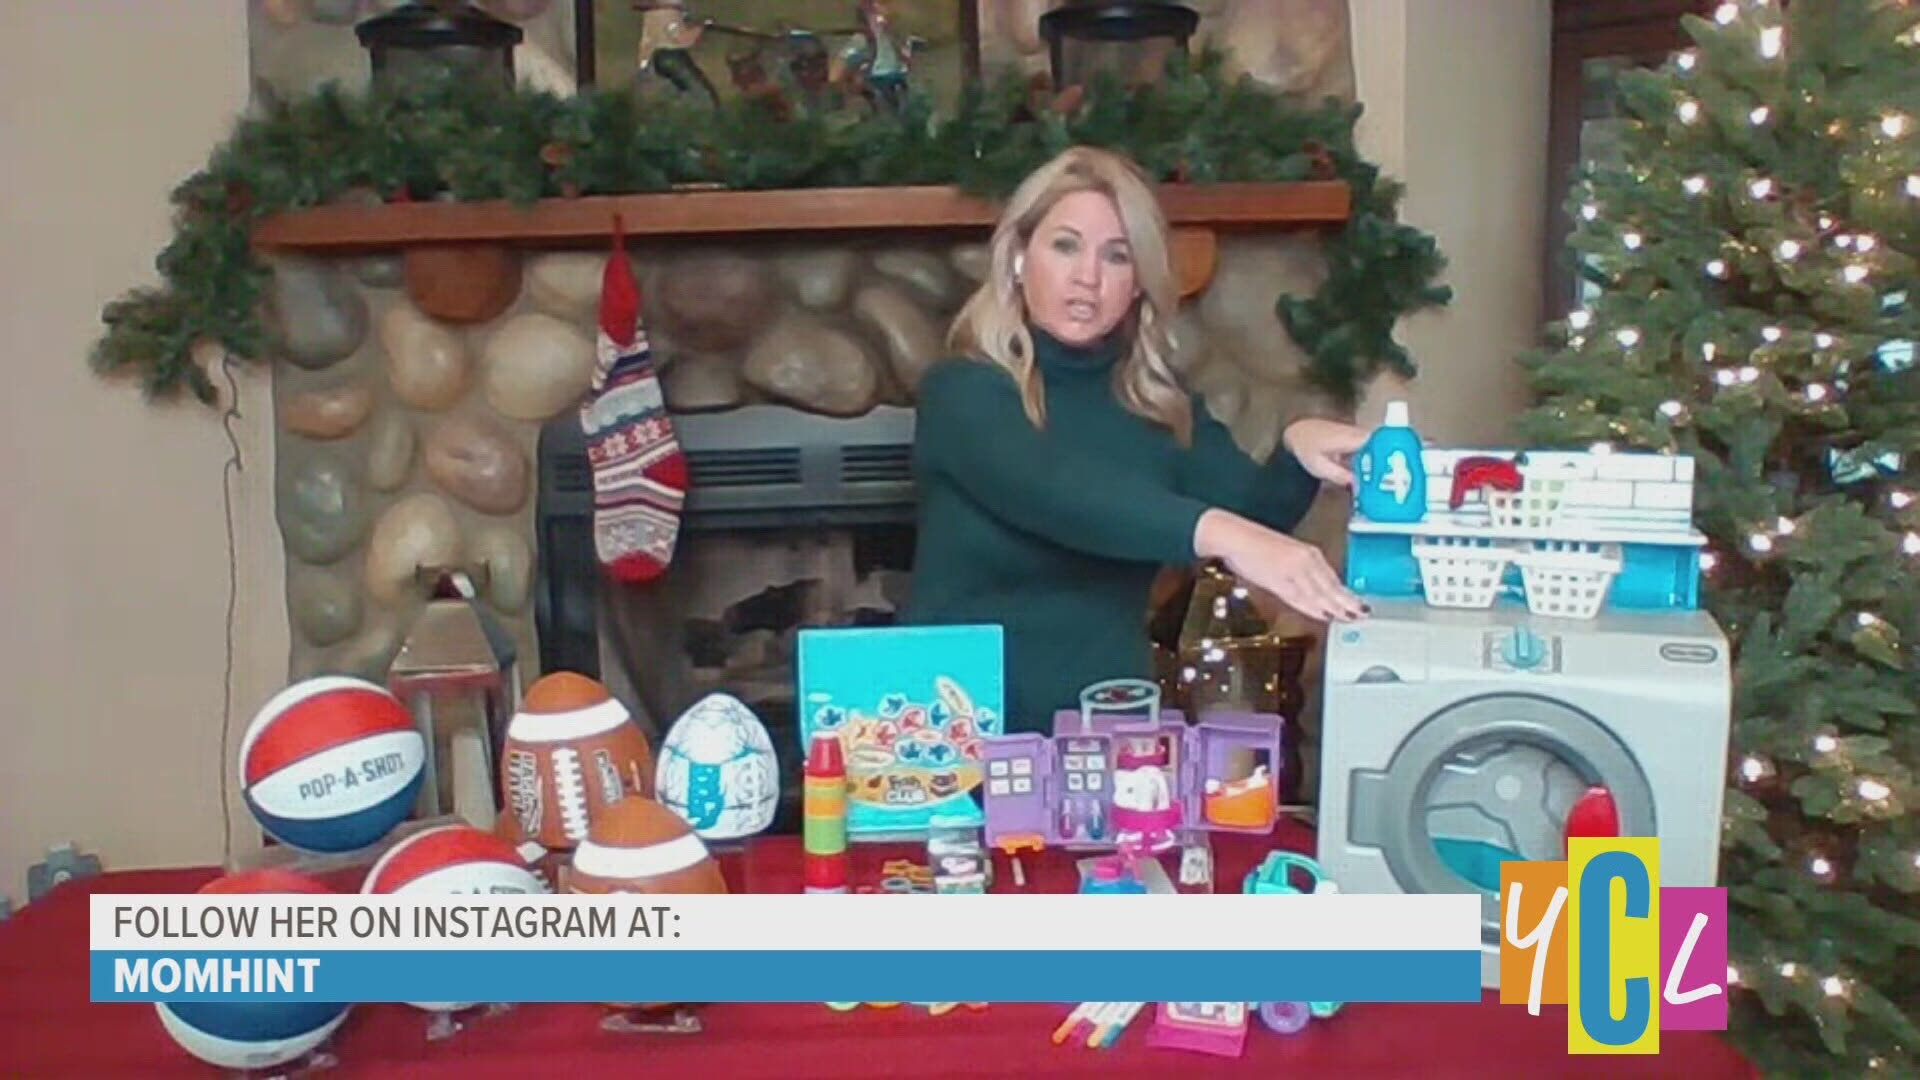 Parenting expert Sherri French has ideas for gifting the kids this holiday with items that bring both fun and games. This segment was paid for by MomHint.